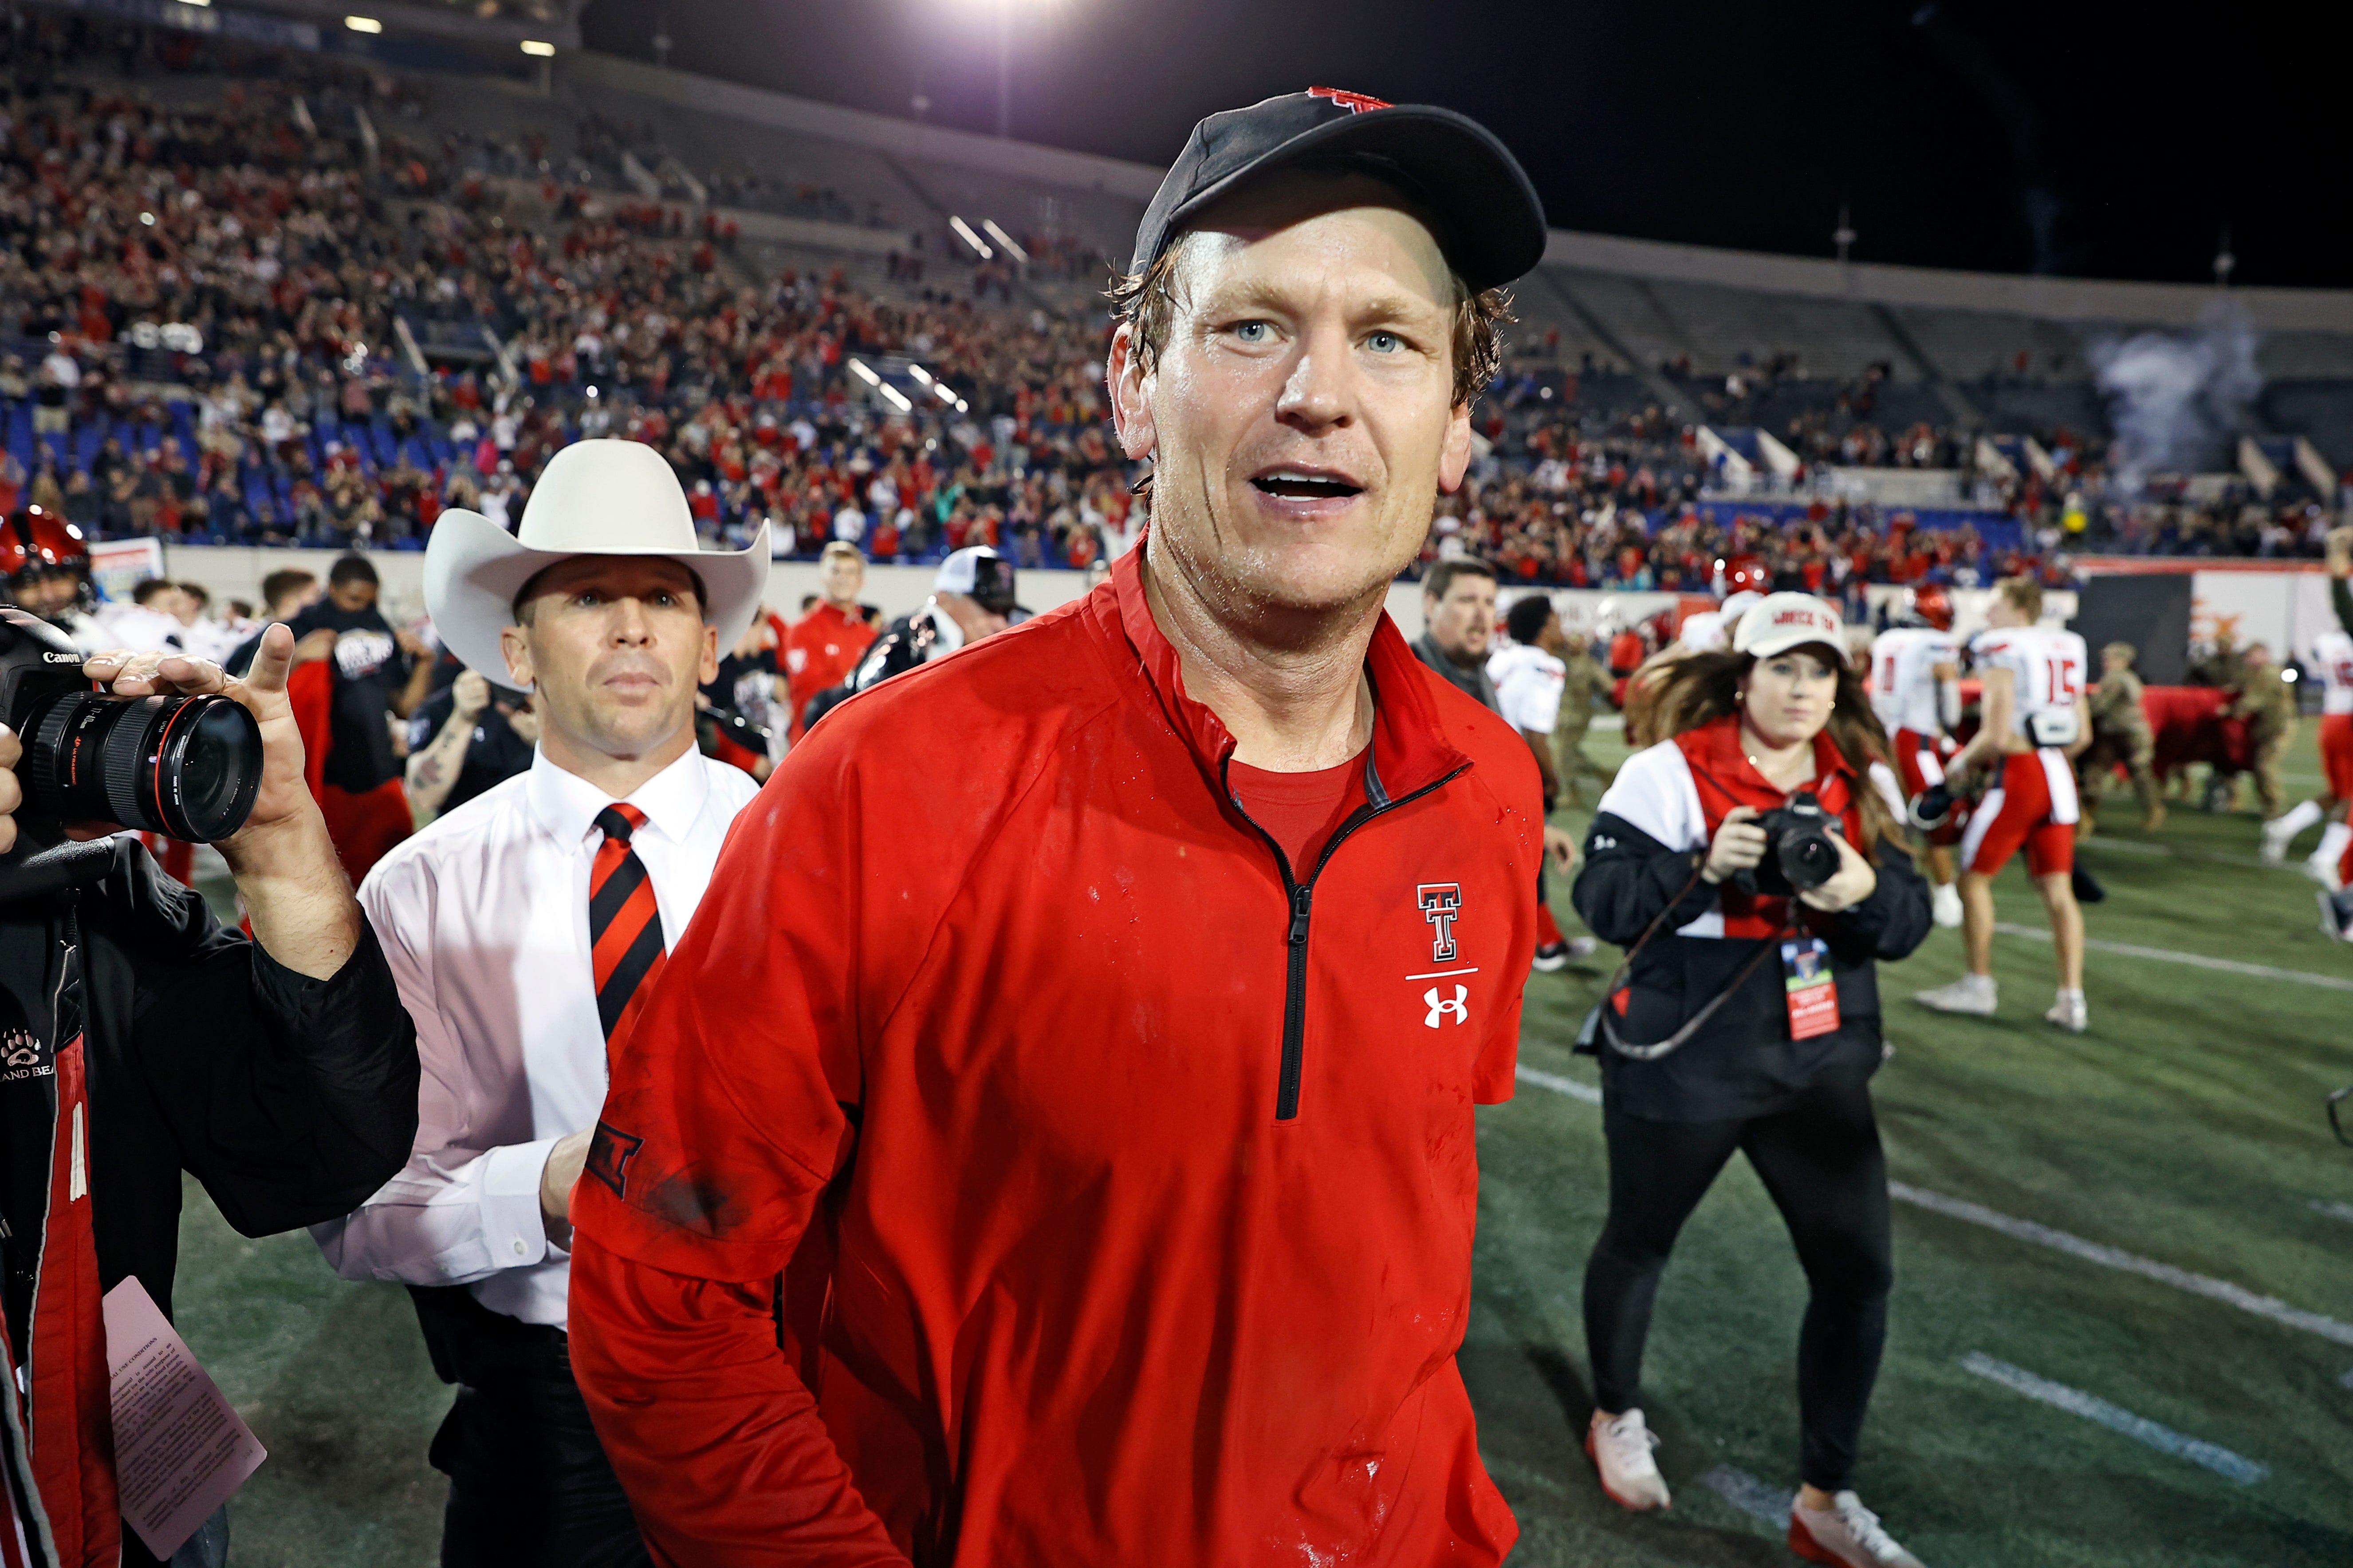 5 Takeaways from Texas Tech's Liberty Bowl victory over Mississippi State